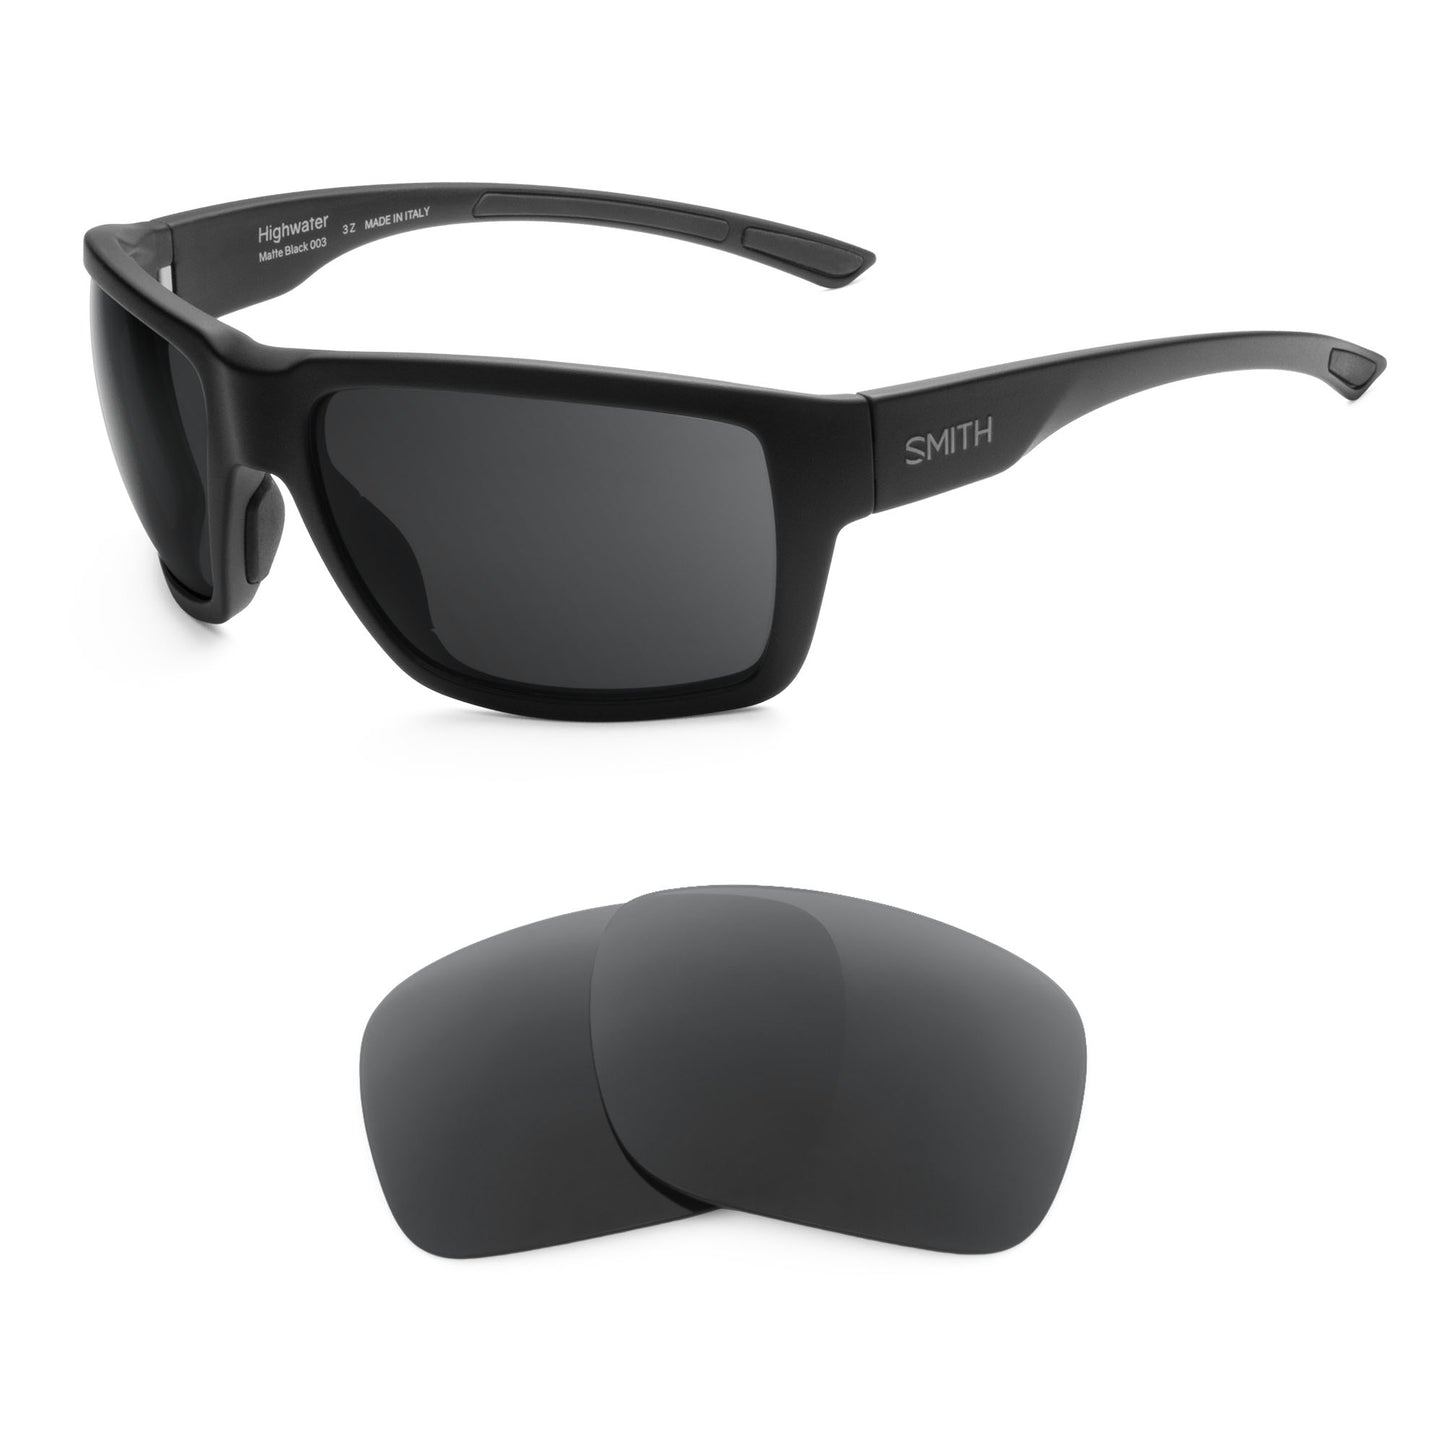 Smith Highwater sunglasses with replacement lenses